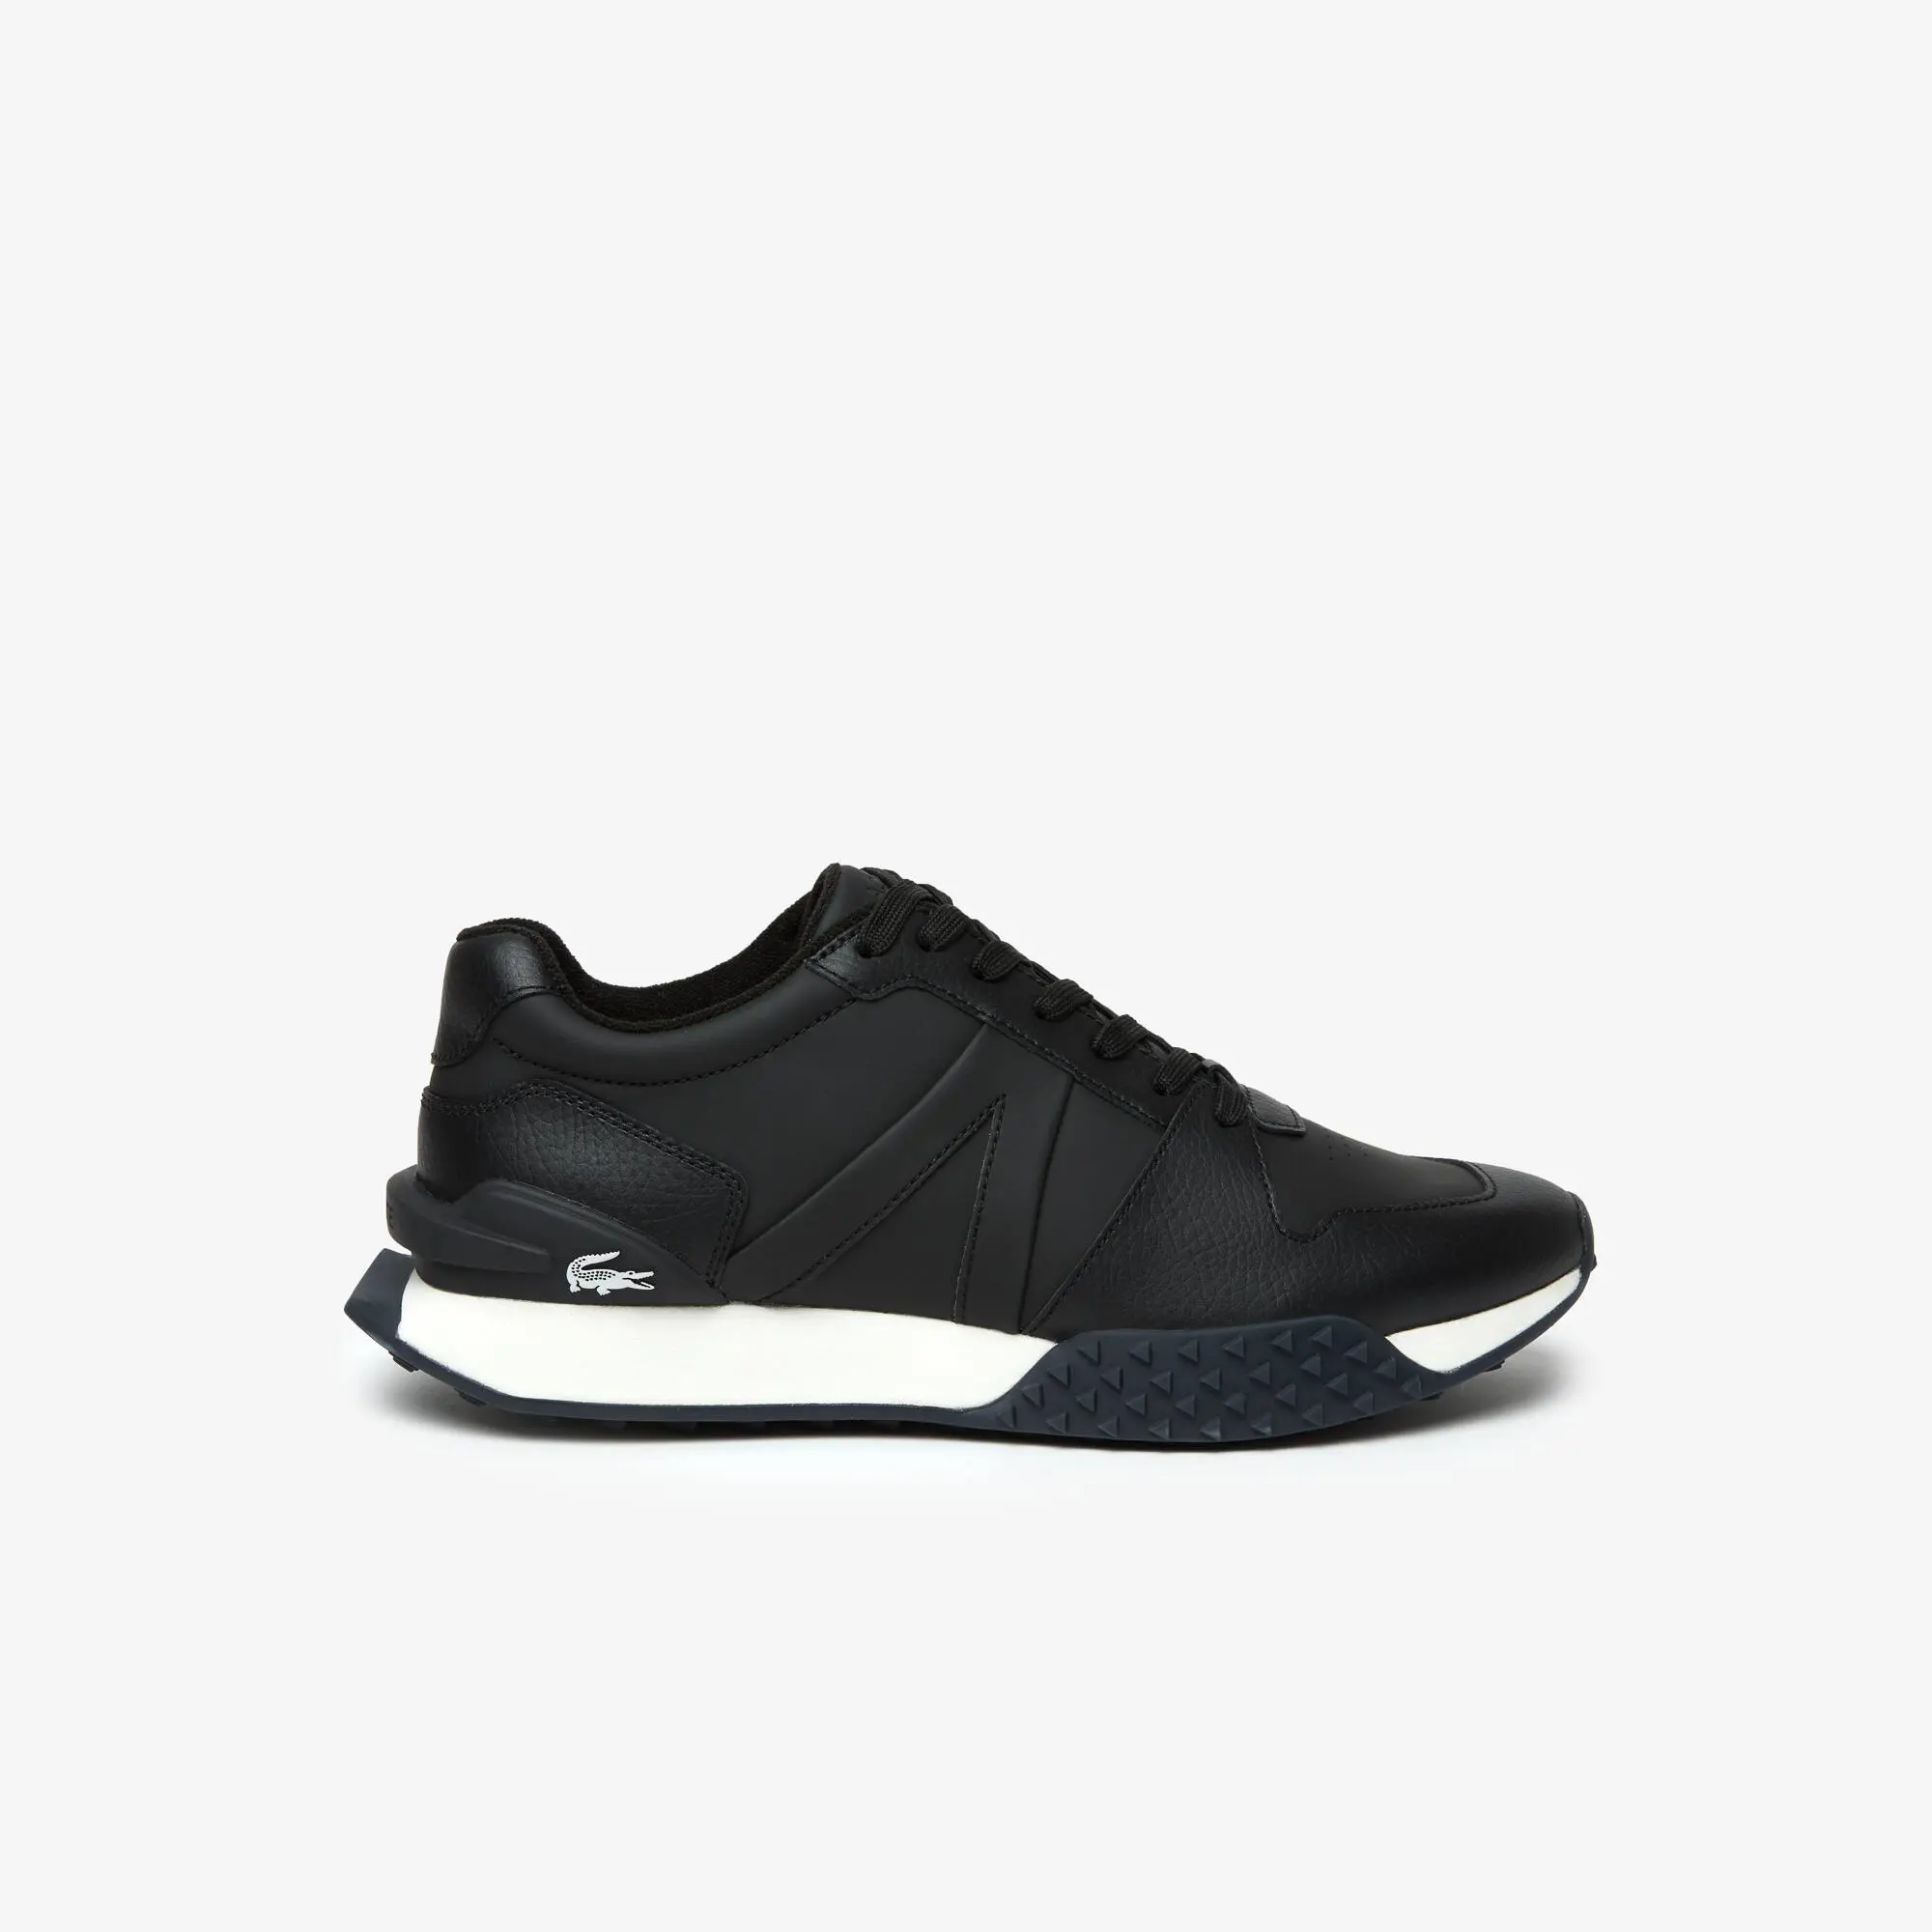 Lacoste Men's Lacoste L-Spin Deluxe 2.0 Synthetic Trainers. 1